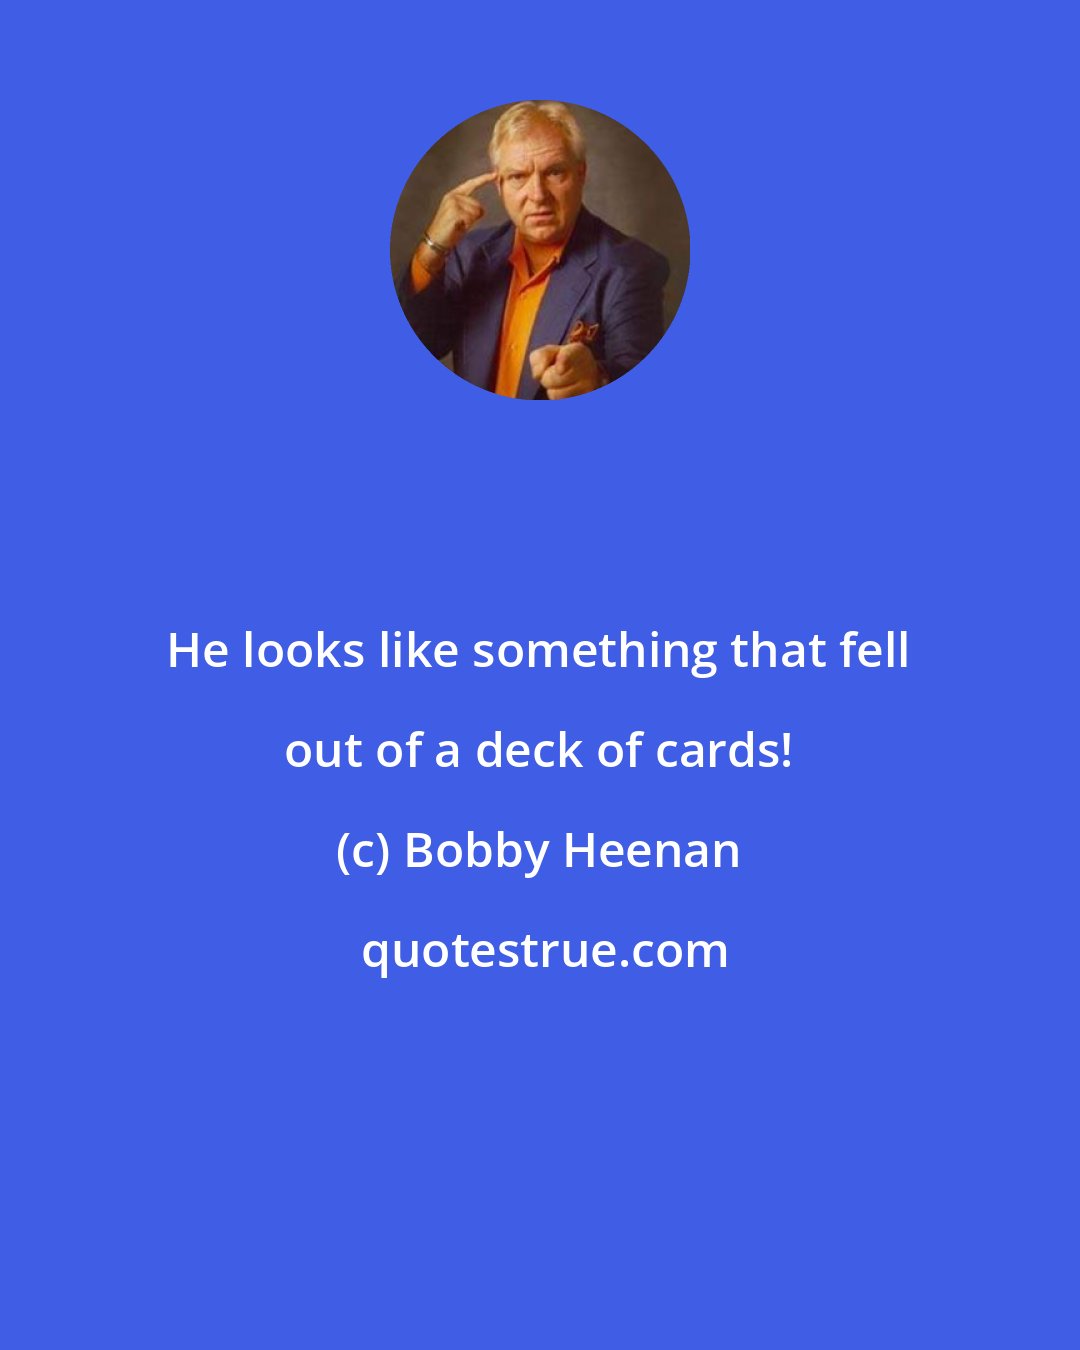 Bobby Heenan: He looks like something that fell out of a deck of cards!